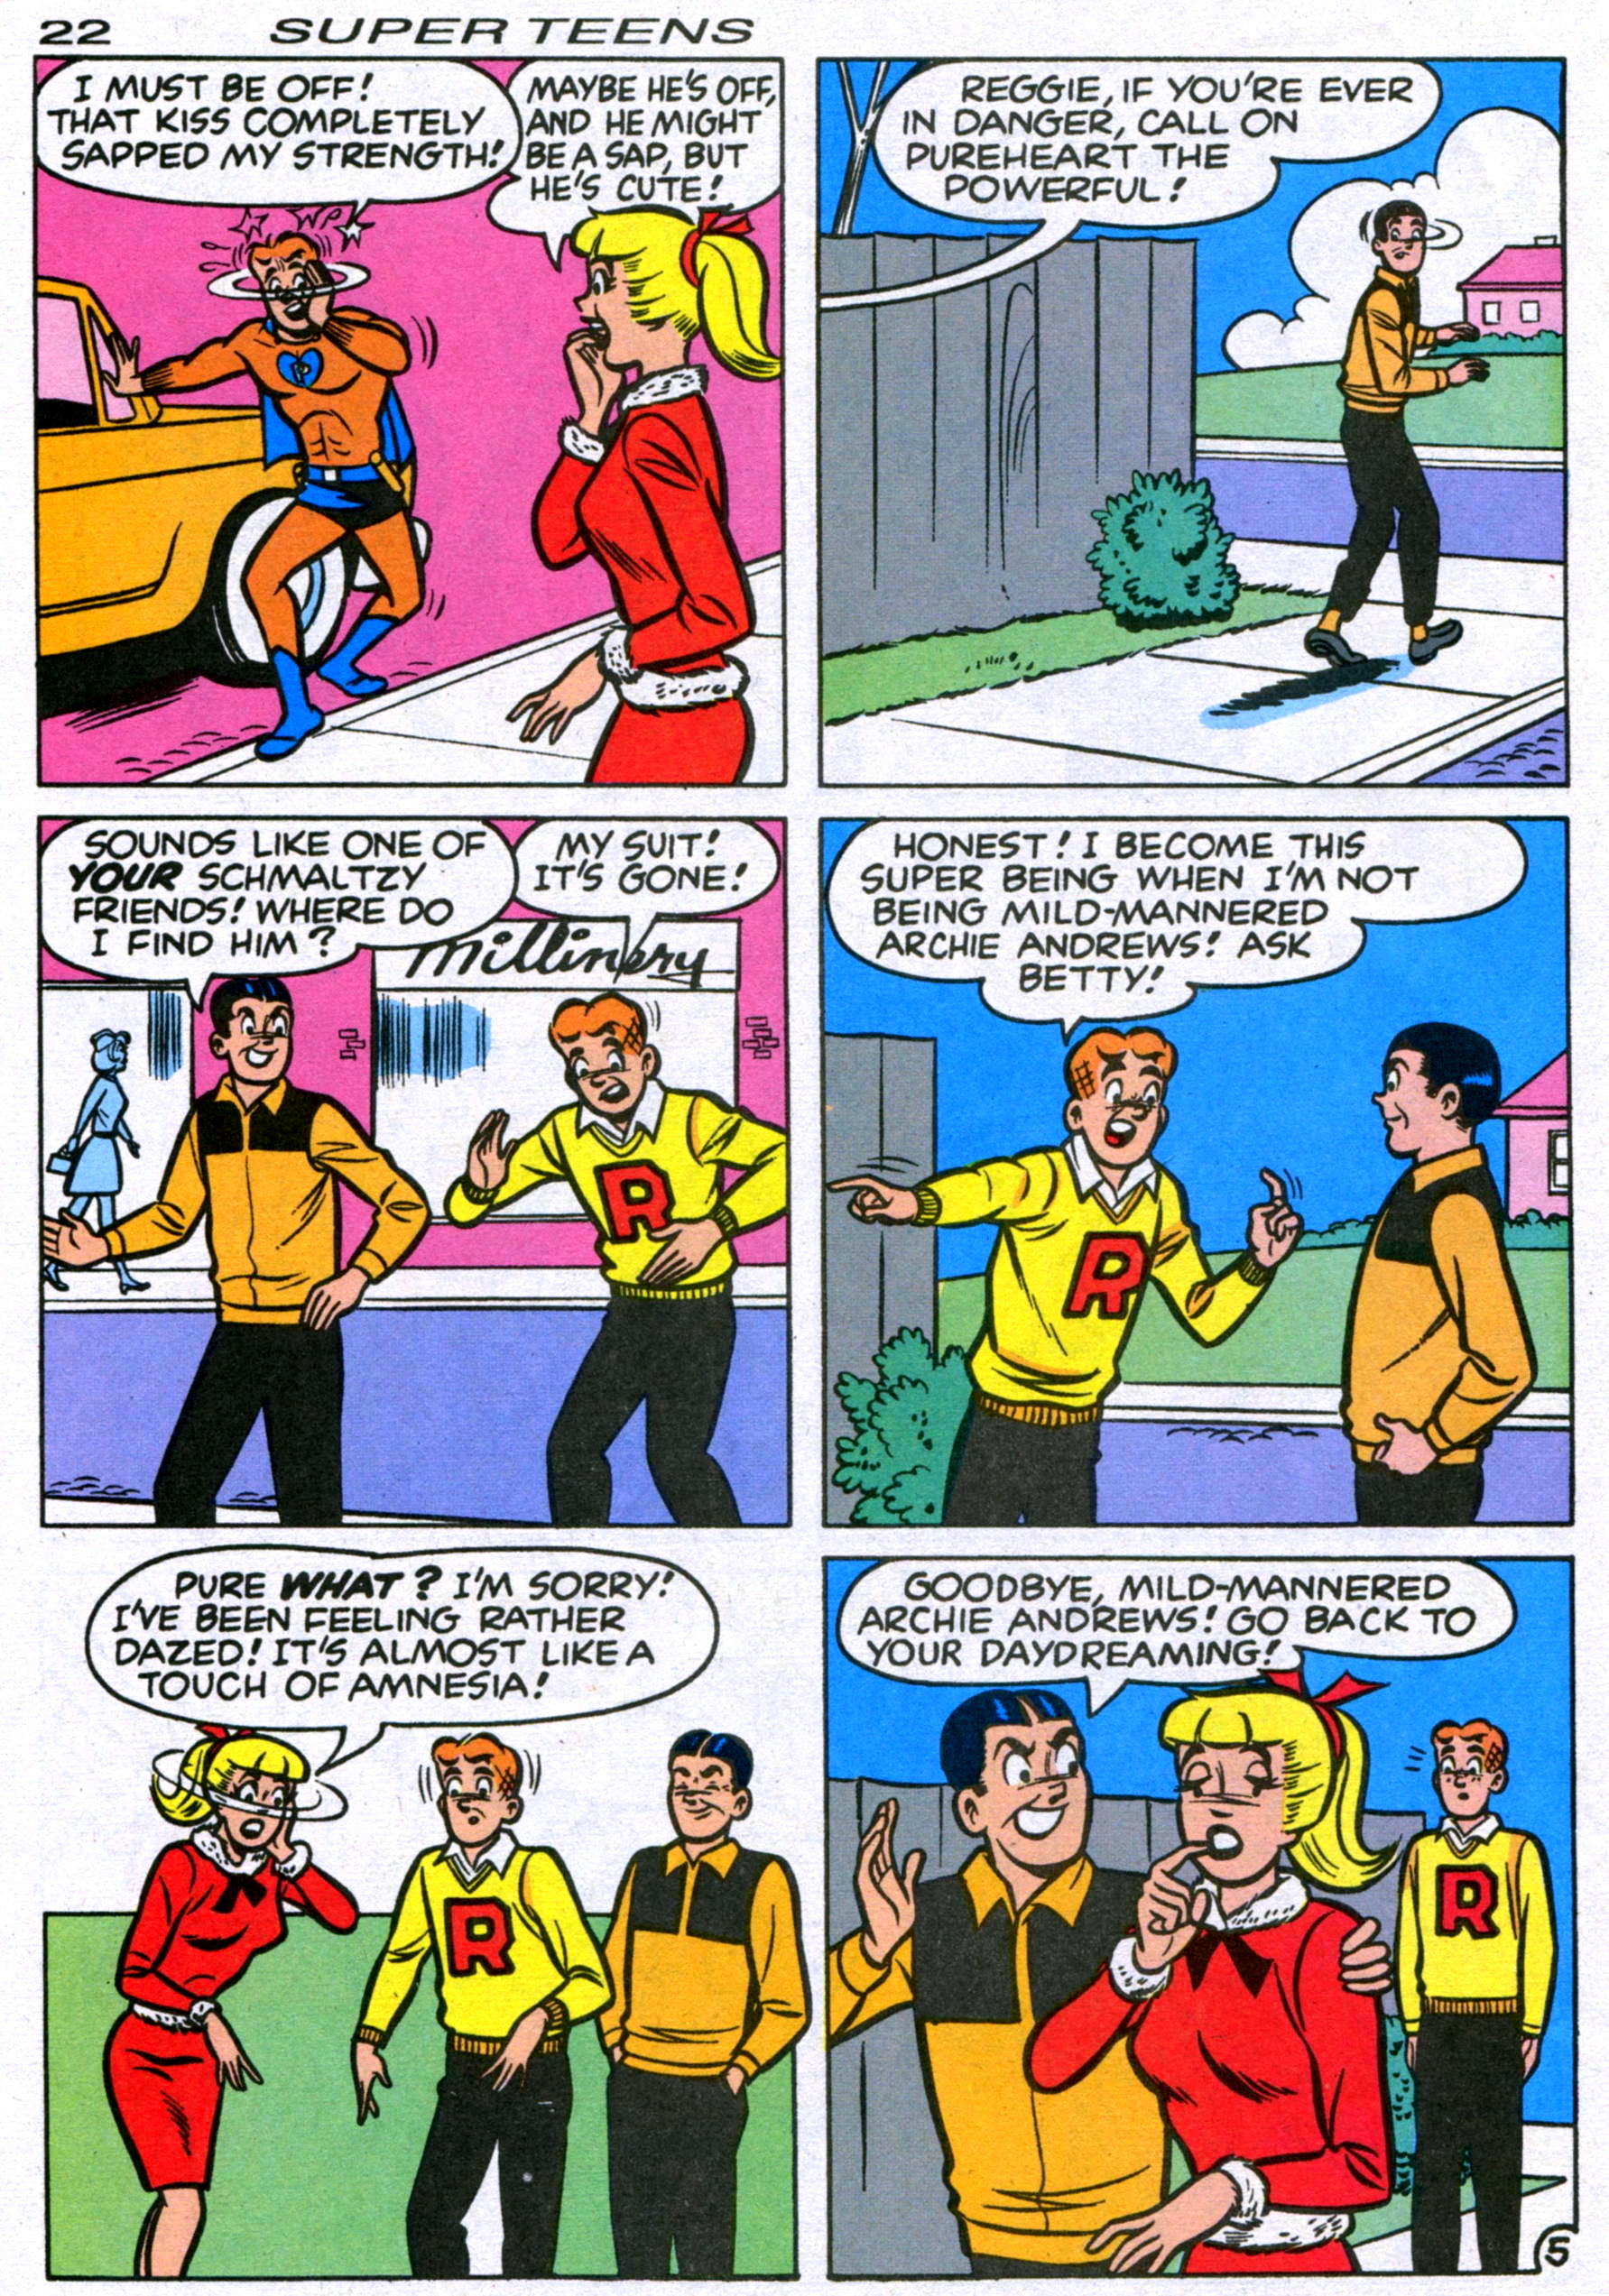 Read online Archie's Super Teens comic -  Issue #1 - 24